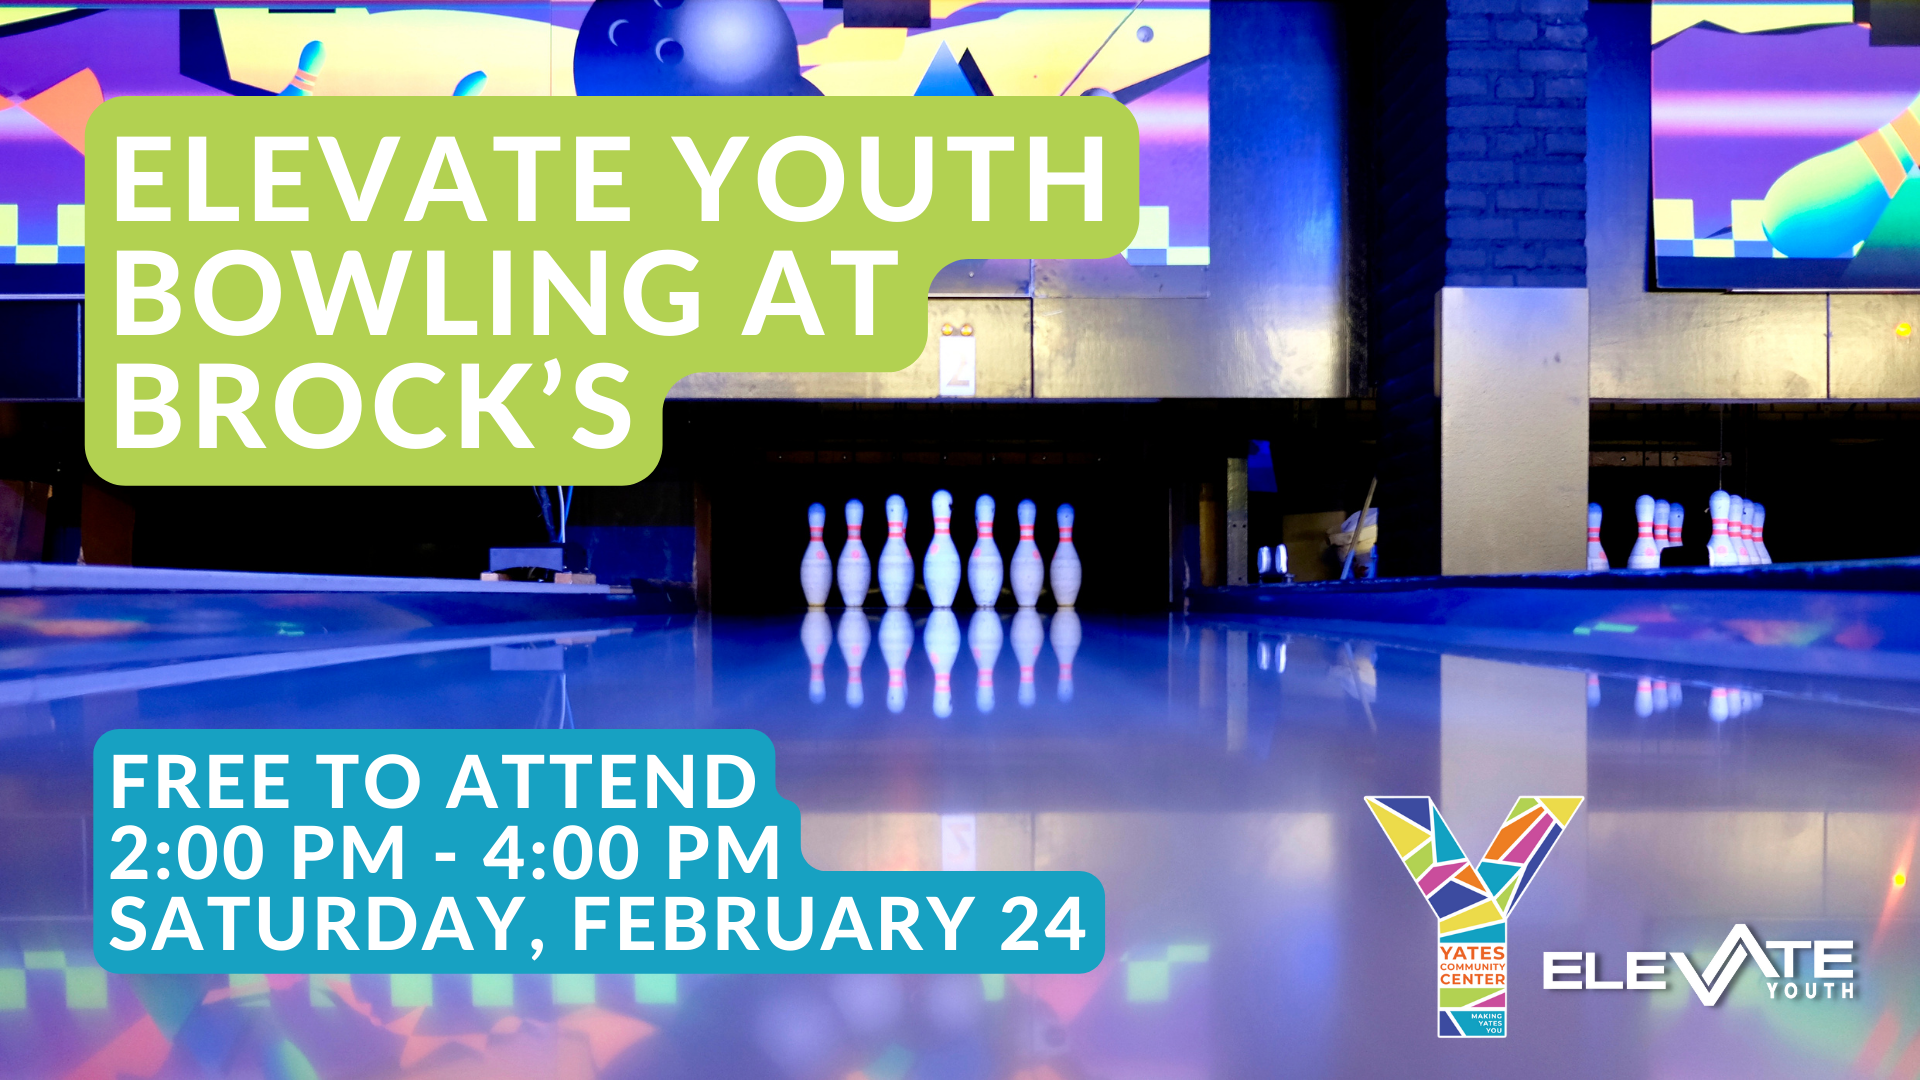 Yates Community Center ELEVATE Youth Bowling at Brocks